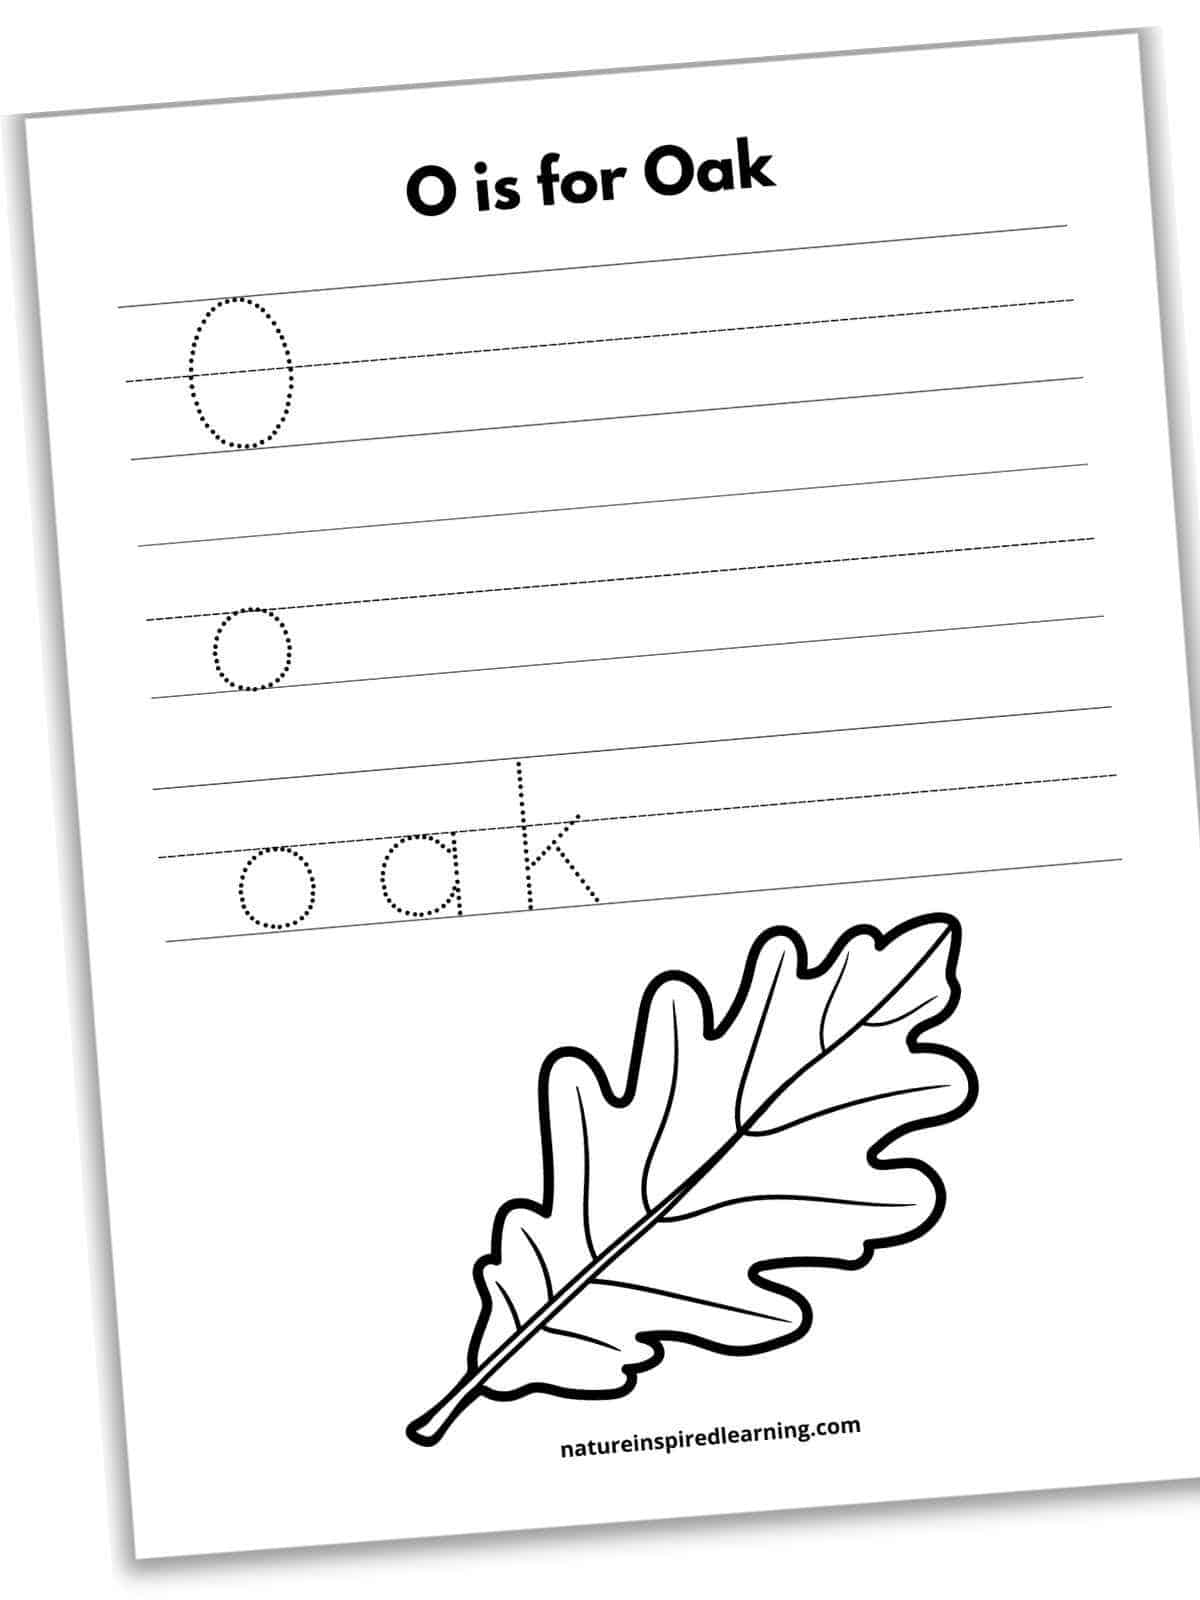 Worksheet with O is for Oak across the top with a dotted O and o to trace along with the word oak. Large black and white oak leaf on the bottom half of worksheet.